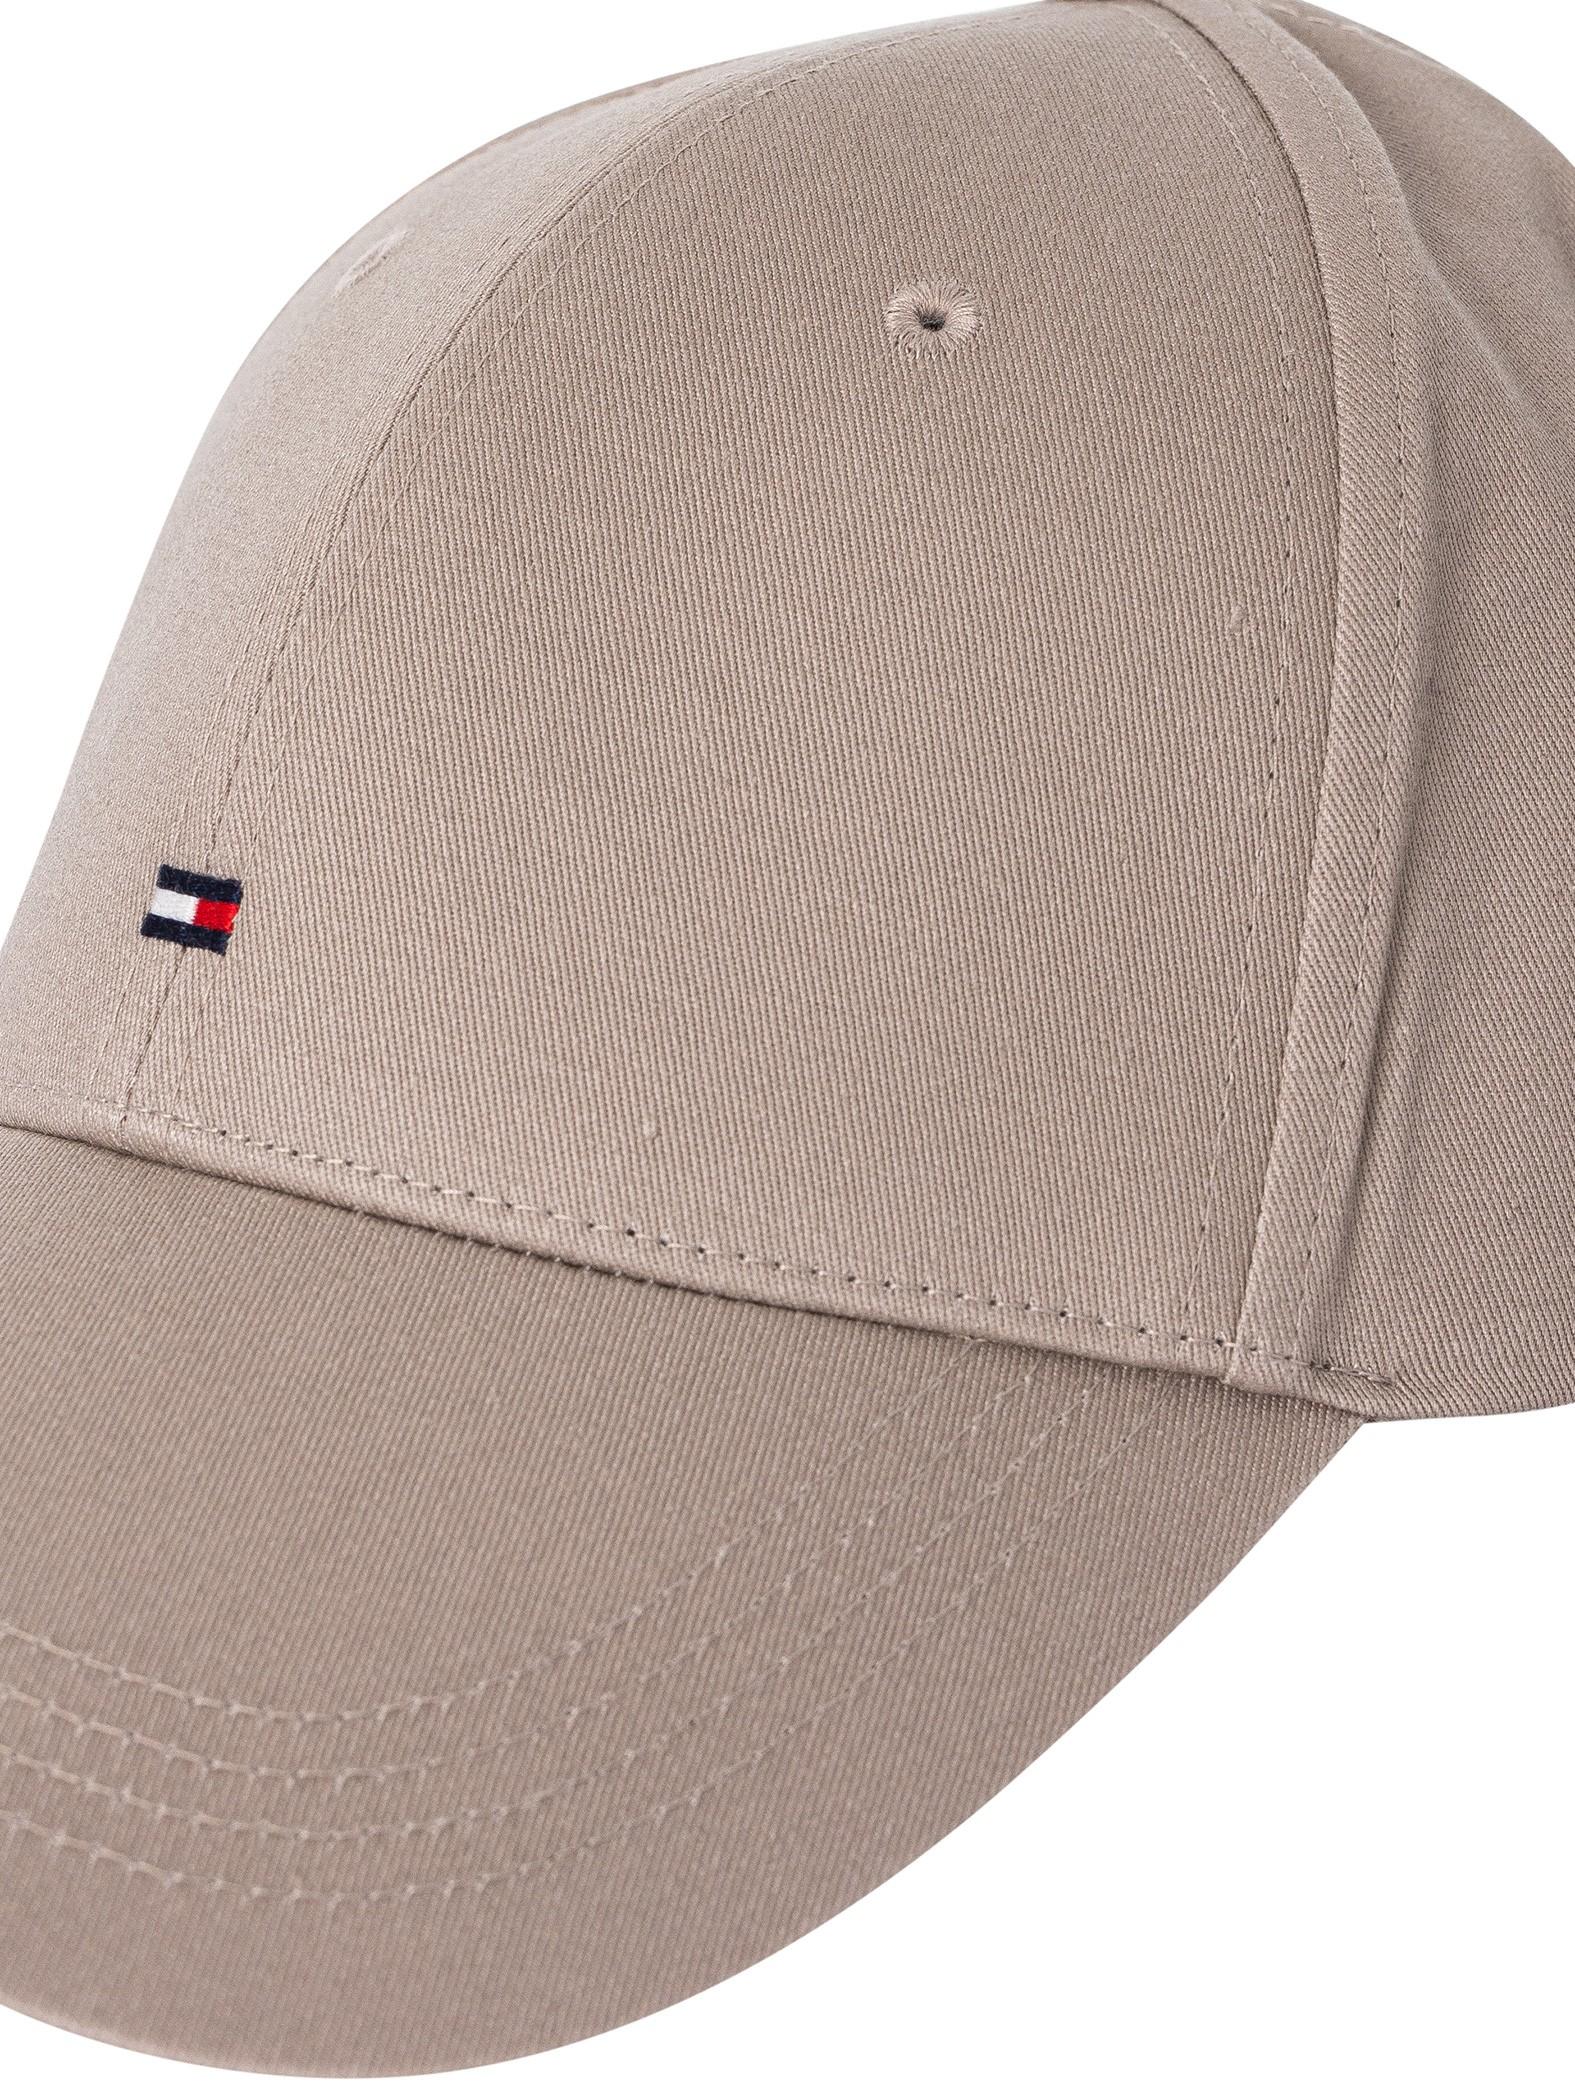 Tommy Hilfiger Flag Cotton 6 Panel Cap in Natural for Men | Lyst | Baseball Caps